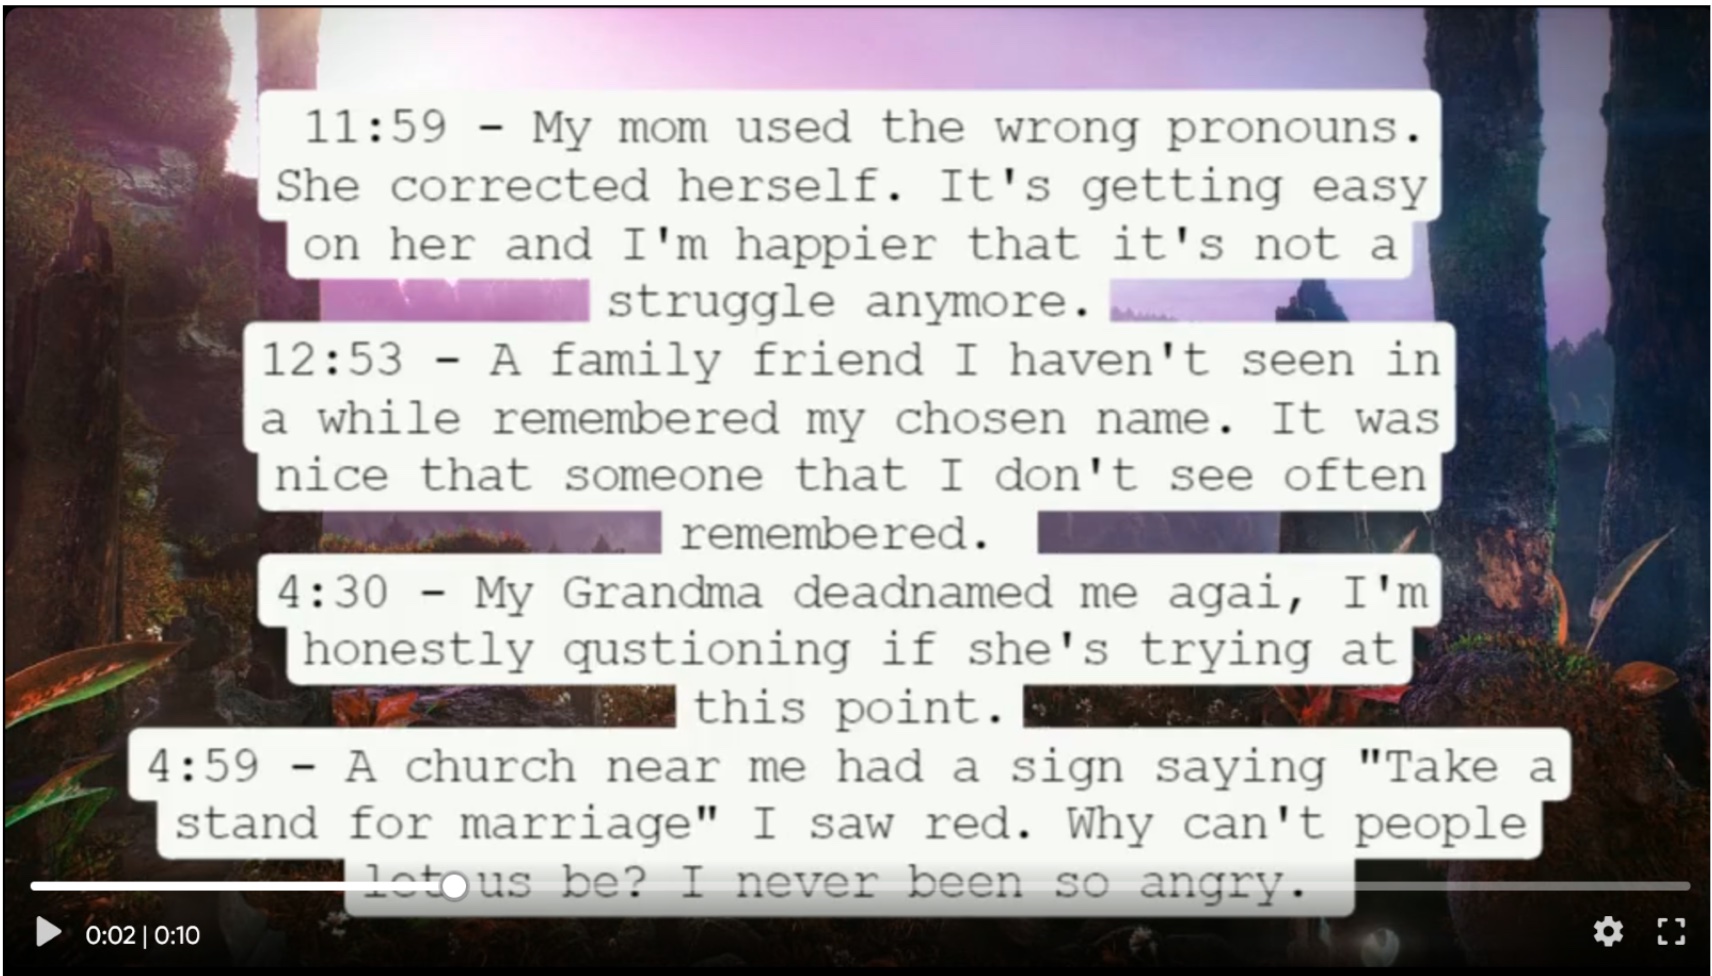 This image contains text taken in note form. It reads: 11:59 My mom used the wrong pronouns. She corrected herself. It's getting easy on her and I'm happier that it's not a struggle anymore. 12:53 A family friend I haven't seen in a while remembered my chosen name. It was nice that someone that I don't see often remembered. 4:30 My grandma deadnamed me again, I'm honestly questioning if she's trying at this point. 4:59 A church near me had a sign saying "Take a stand for marriage" I saw red. Why can't people let us be? I never been so angry.